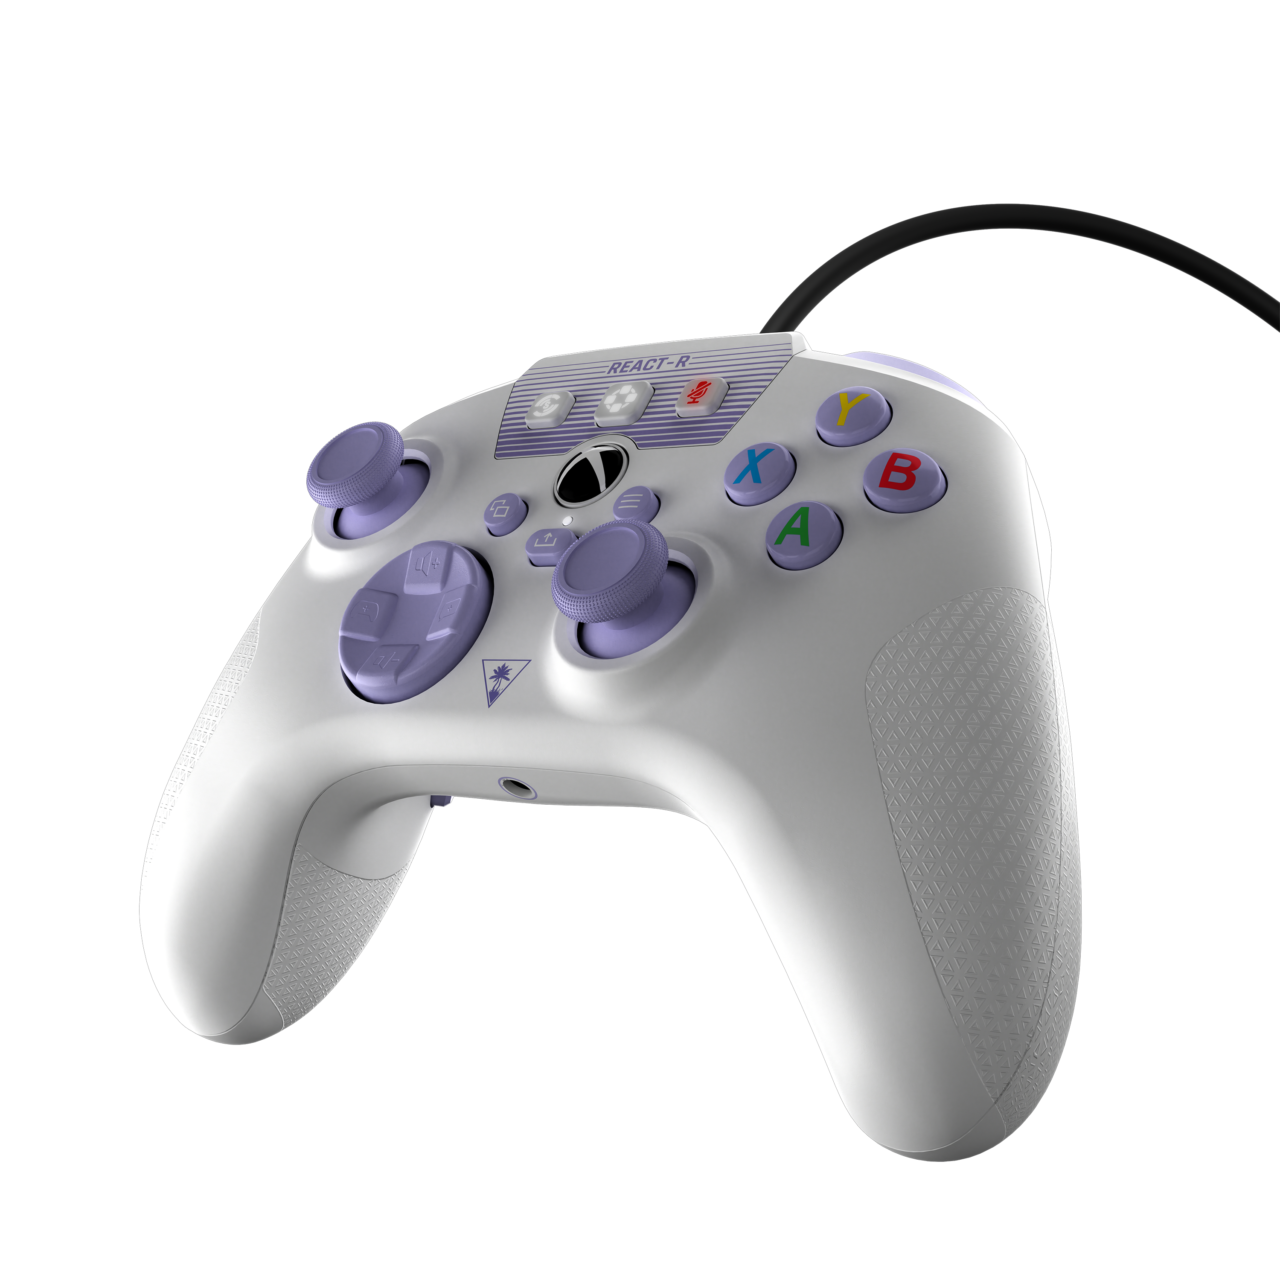 Designed For Xbox React-R Controller (Turtle Beach)